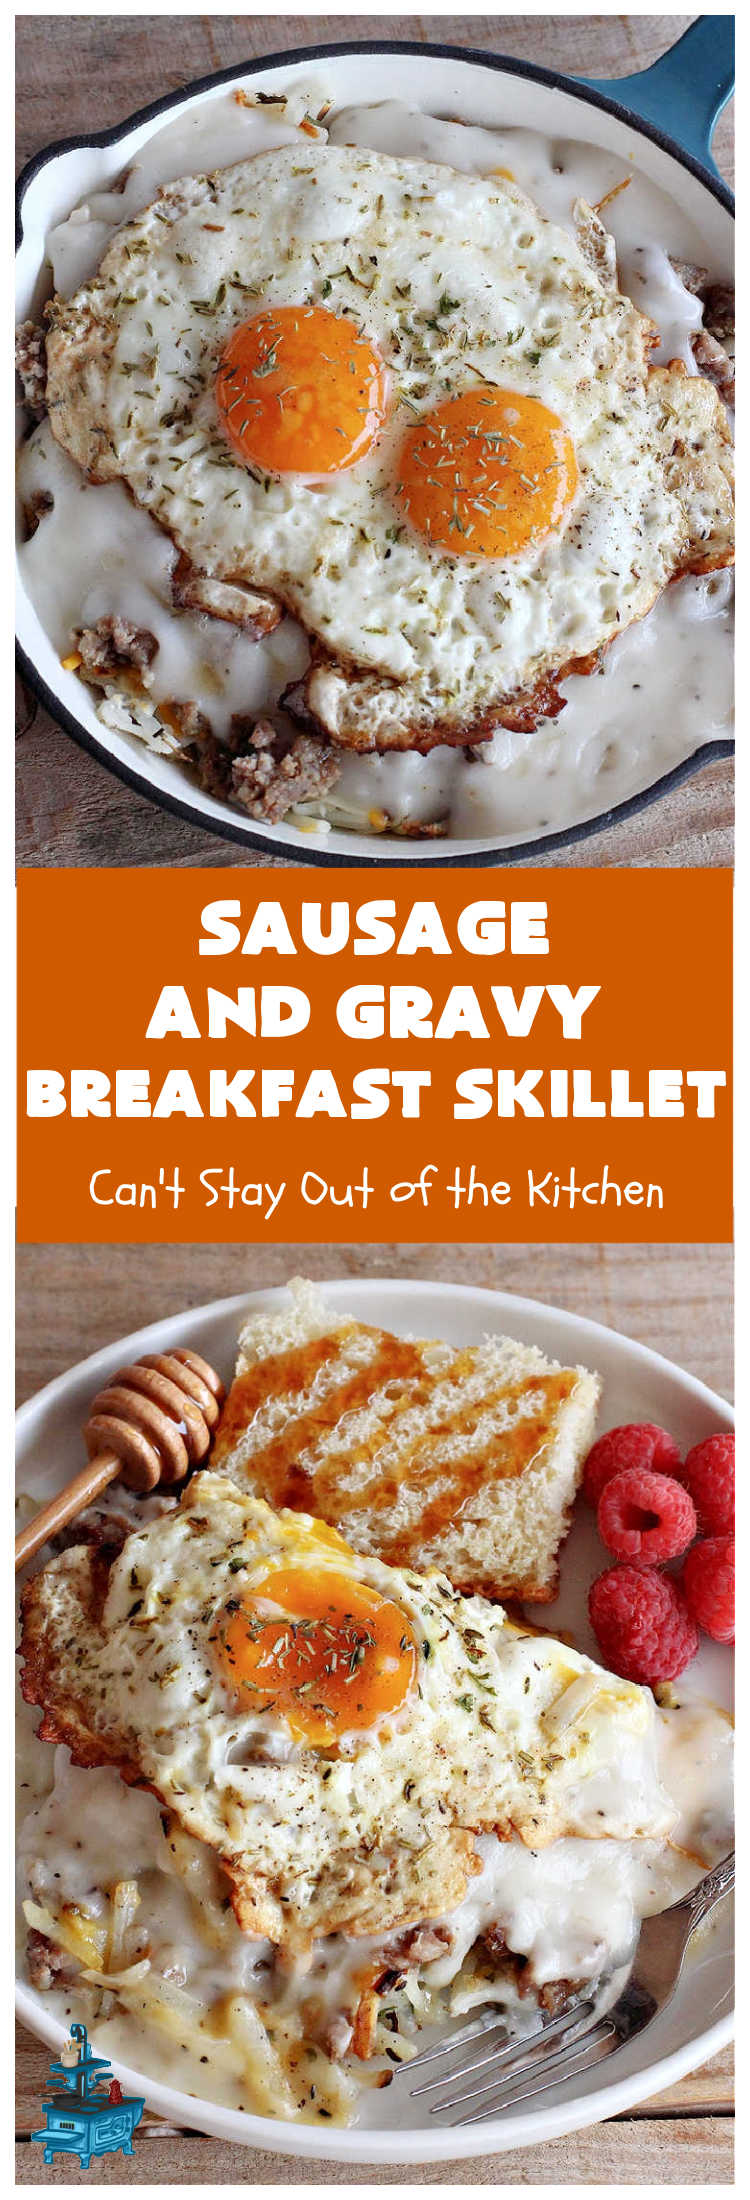 Sausage and Gravy Breakfast Skillet | Can't Stay Out of the Kitchen